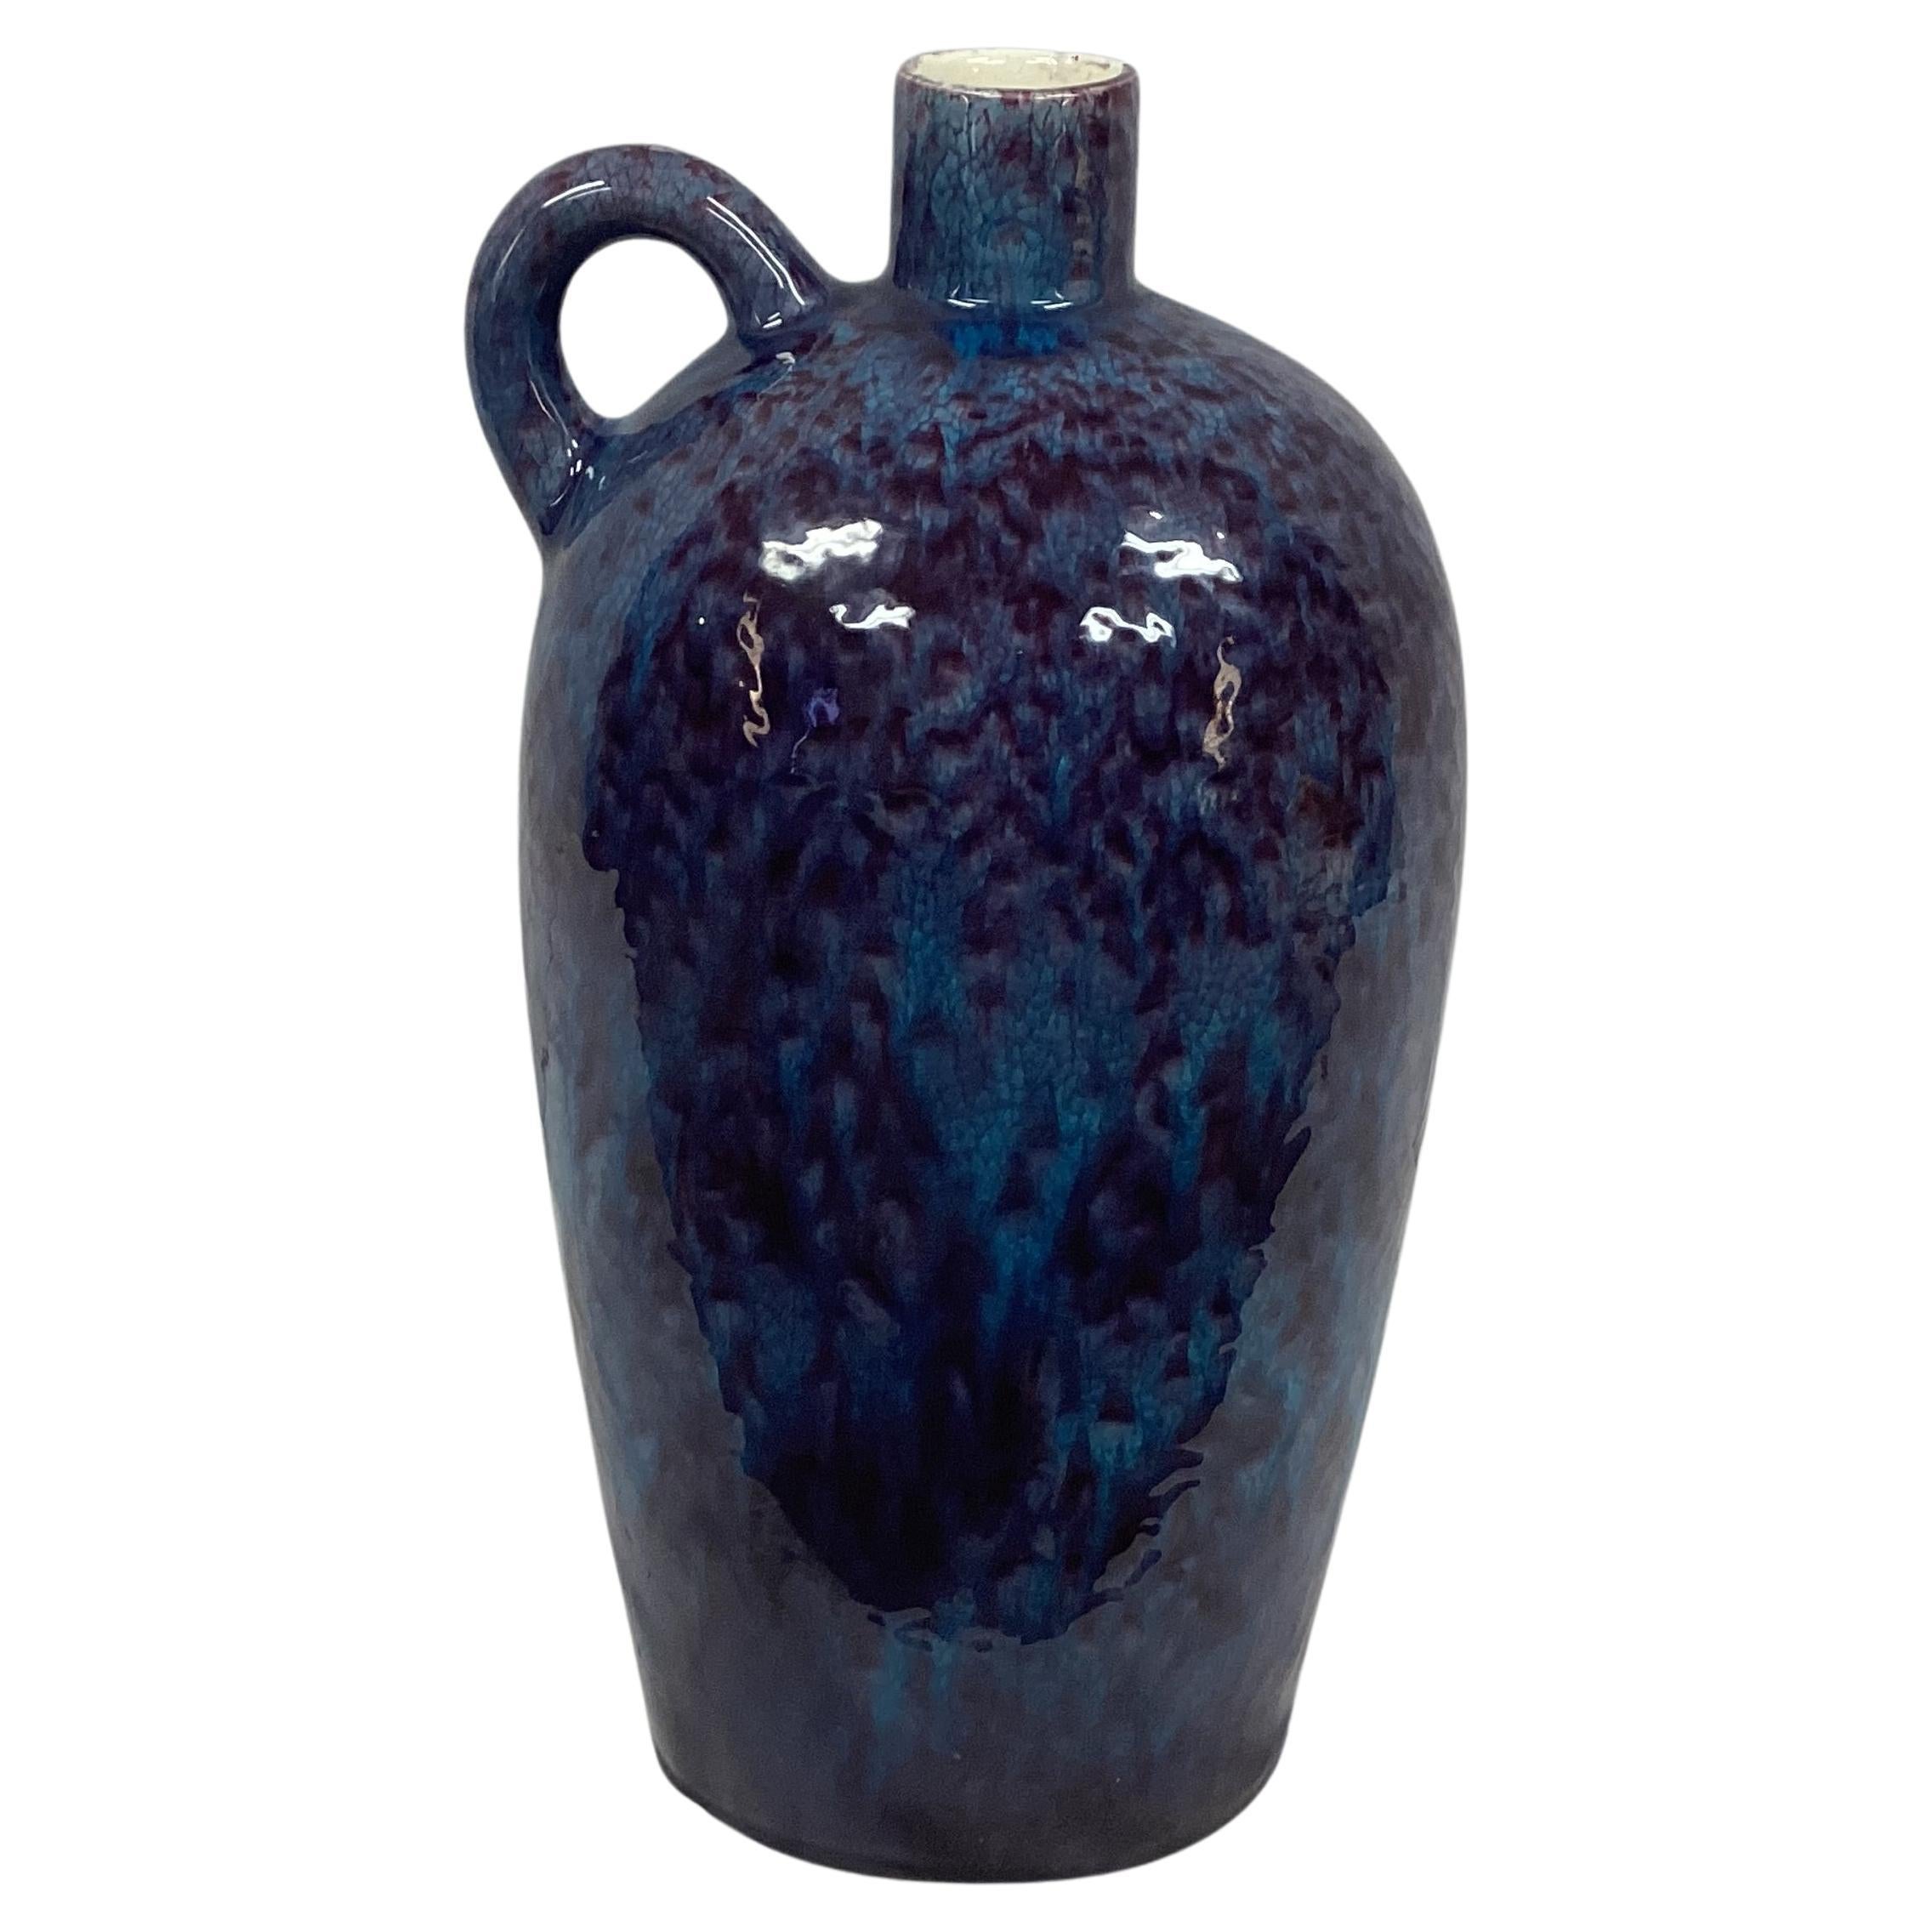 Mid-century Royal Haeger drip glaze pottery vase. Colors featured are rich purple and turquoise. Rounded handle in upper edge of vase. Marked on bottom 